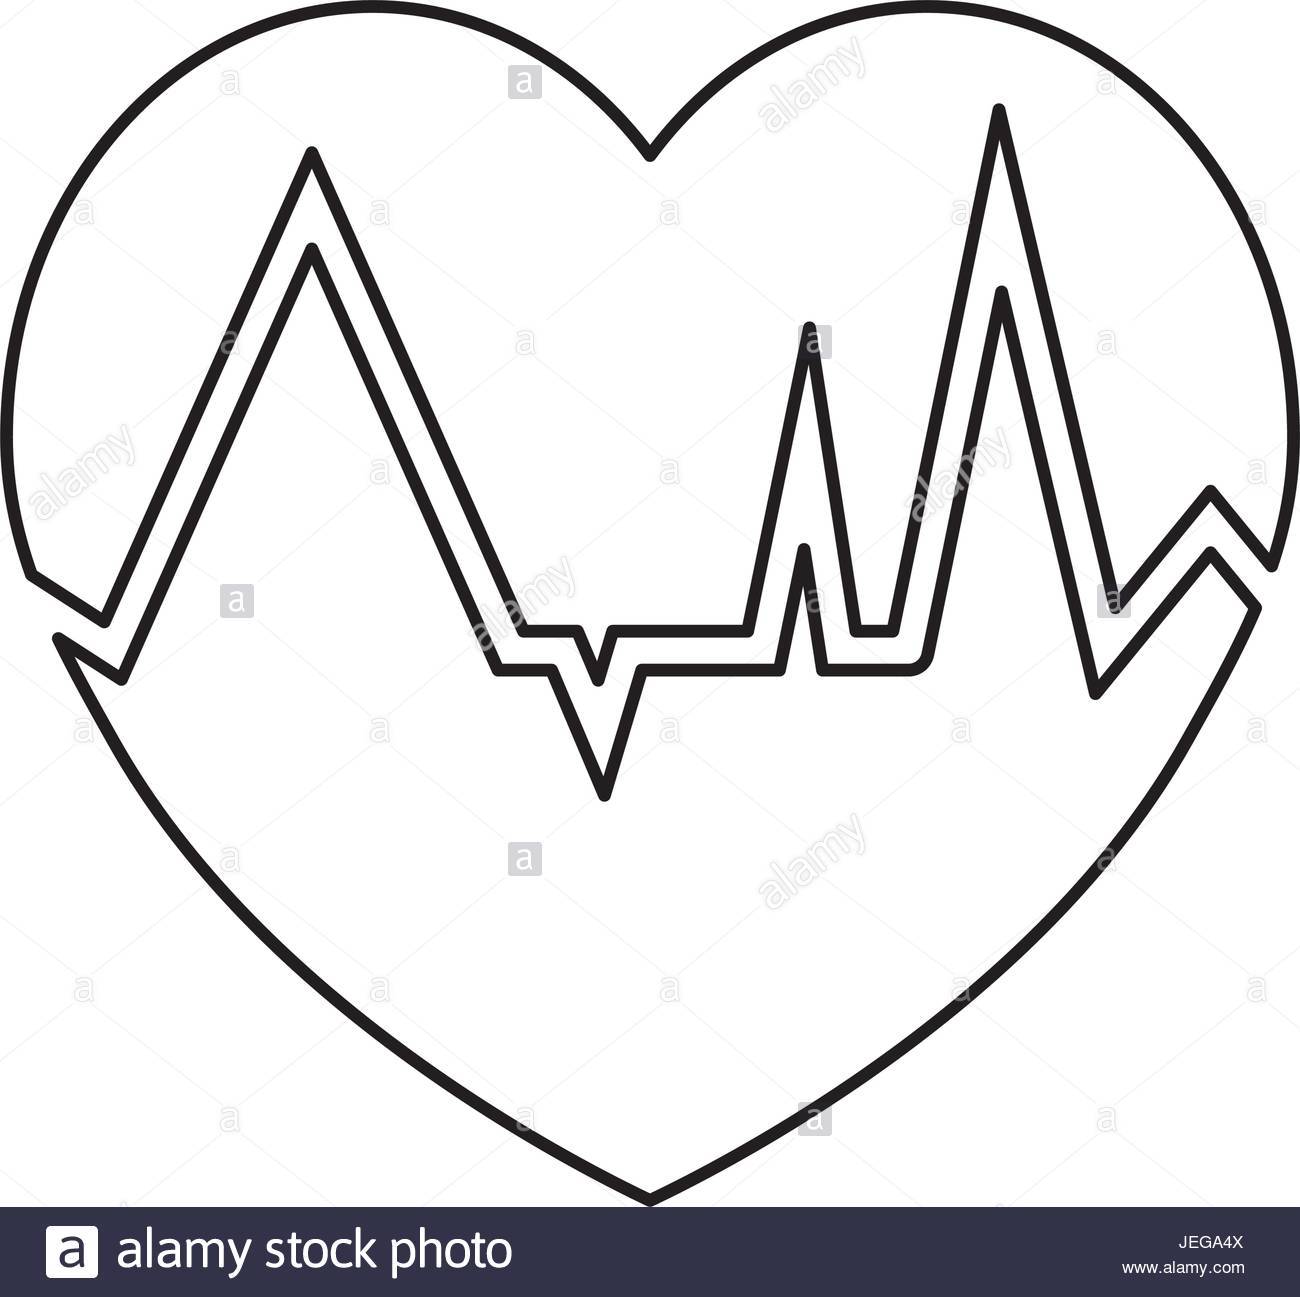 Heartbeat Drawing at GetDrawings | Free download